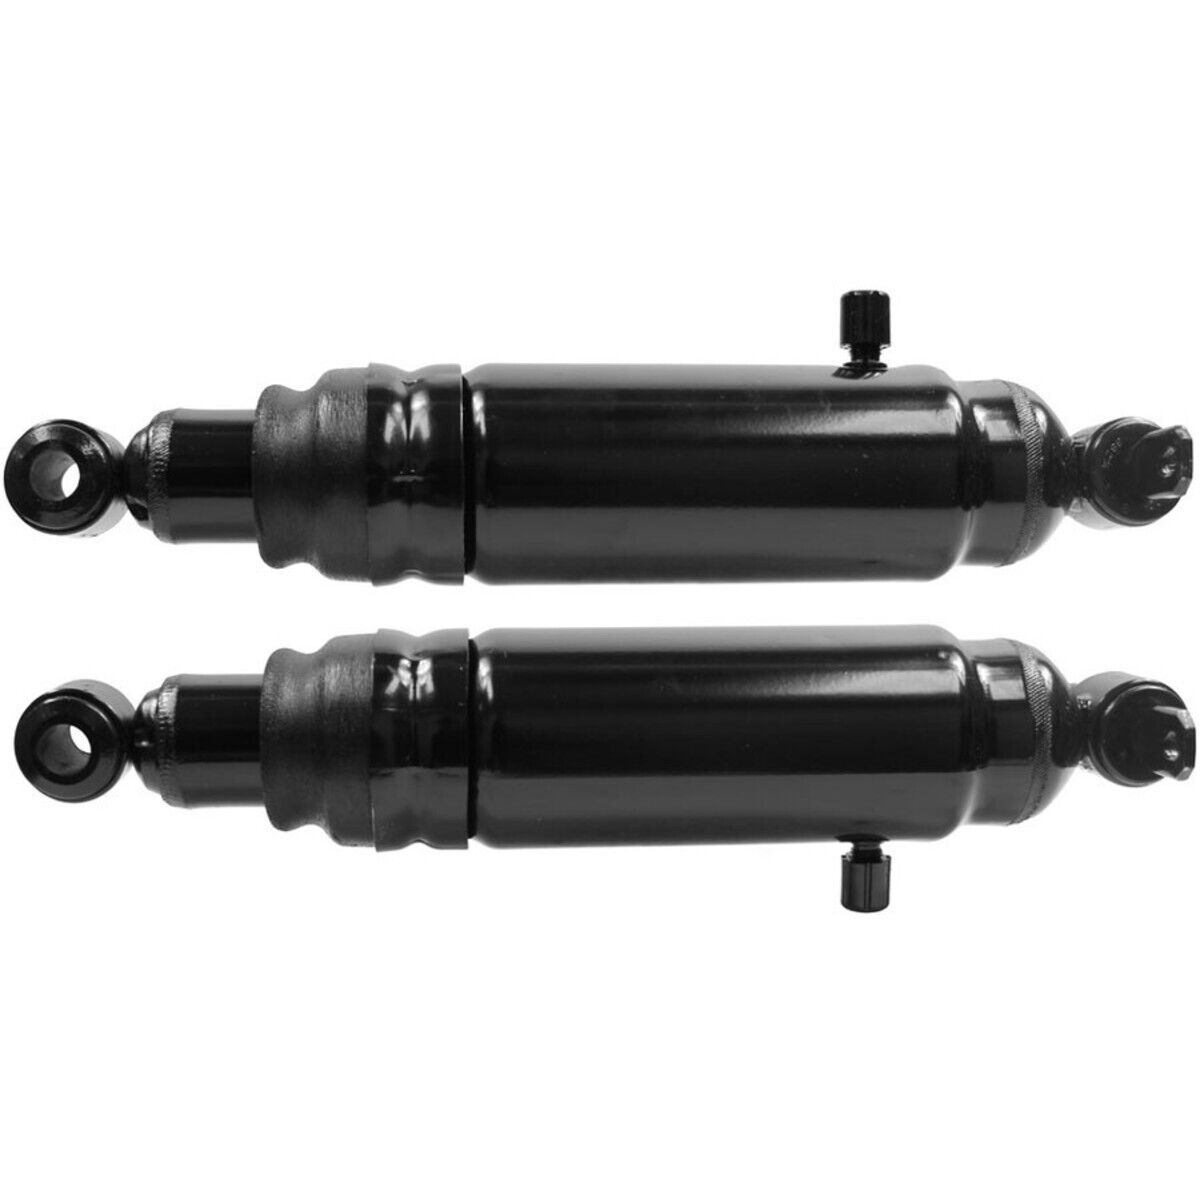 MA762 Monroe Set of 2 Shock Absorber and Strut Assemblies for Chevy Olds Pair